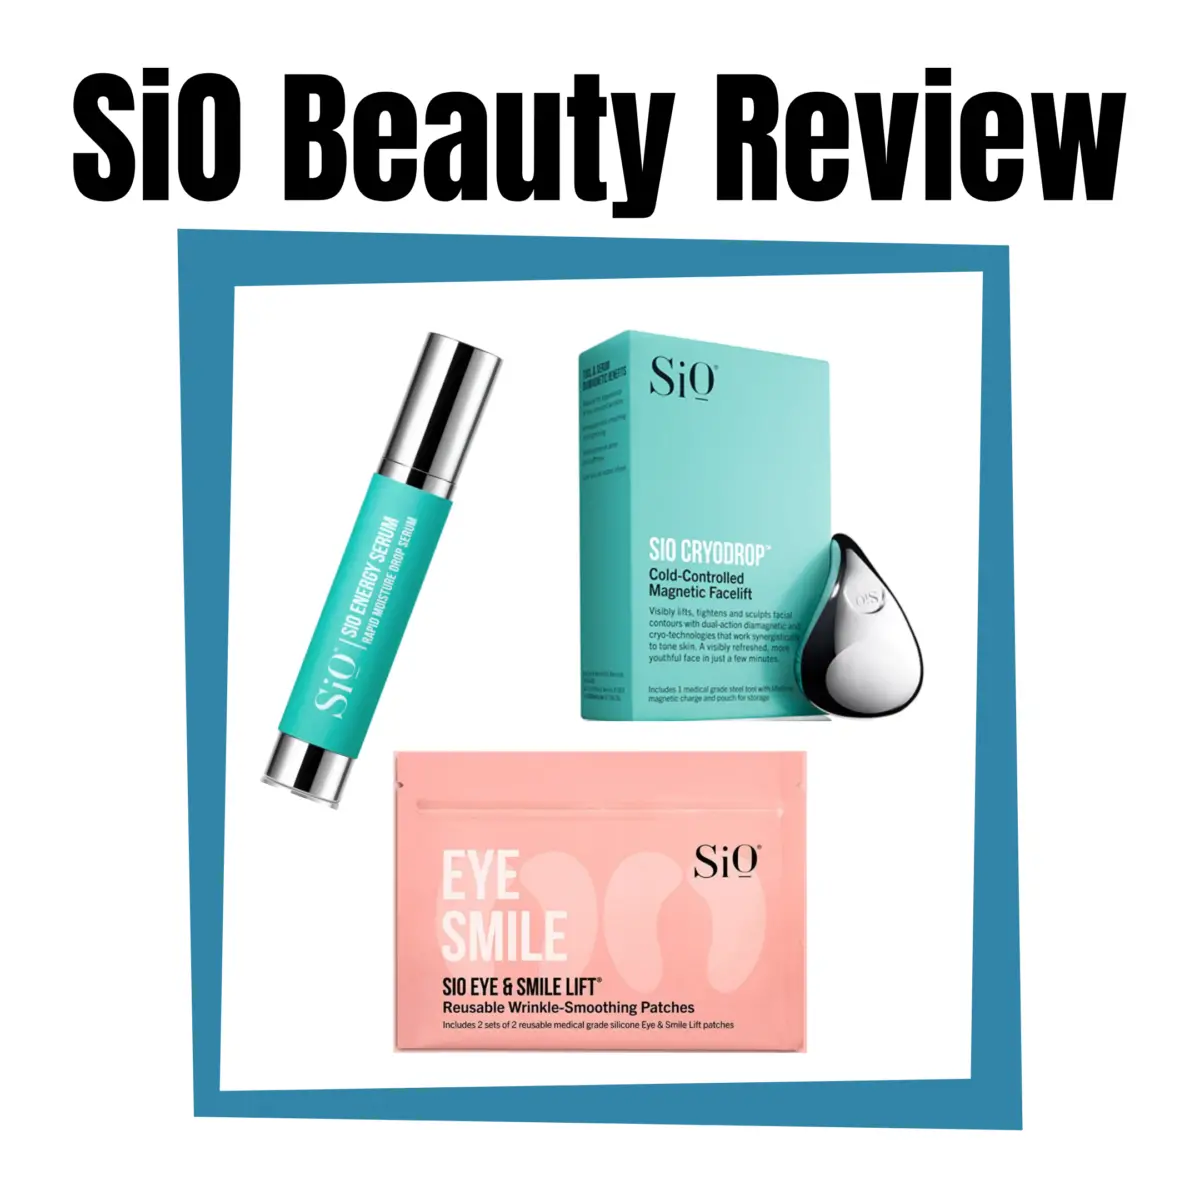 SiO Beauty Review